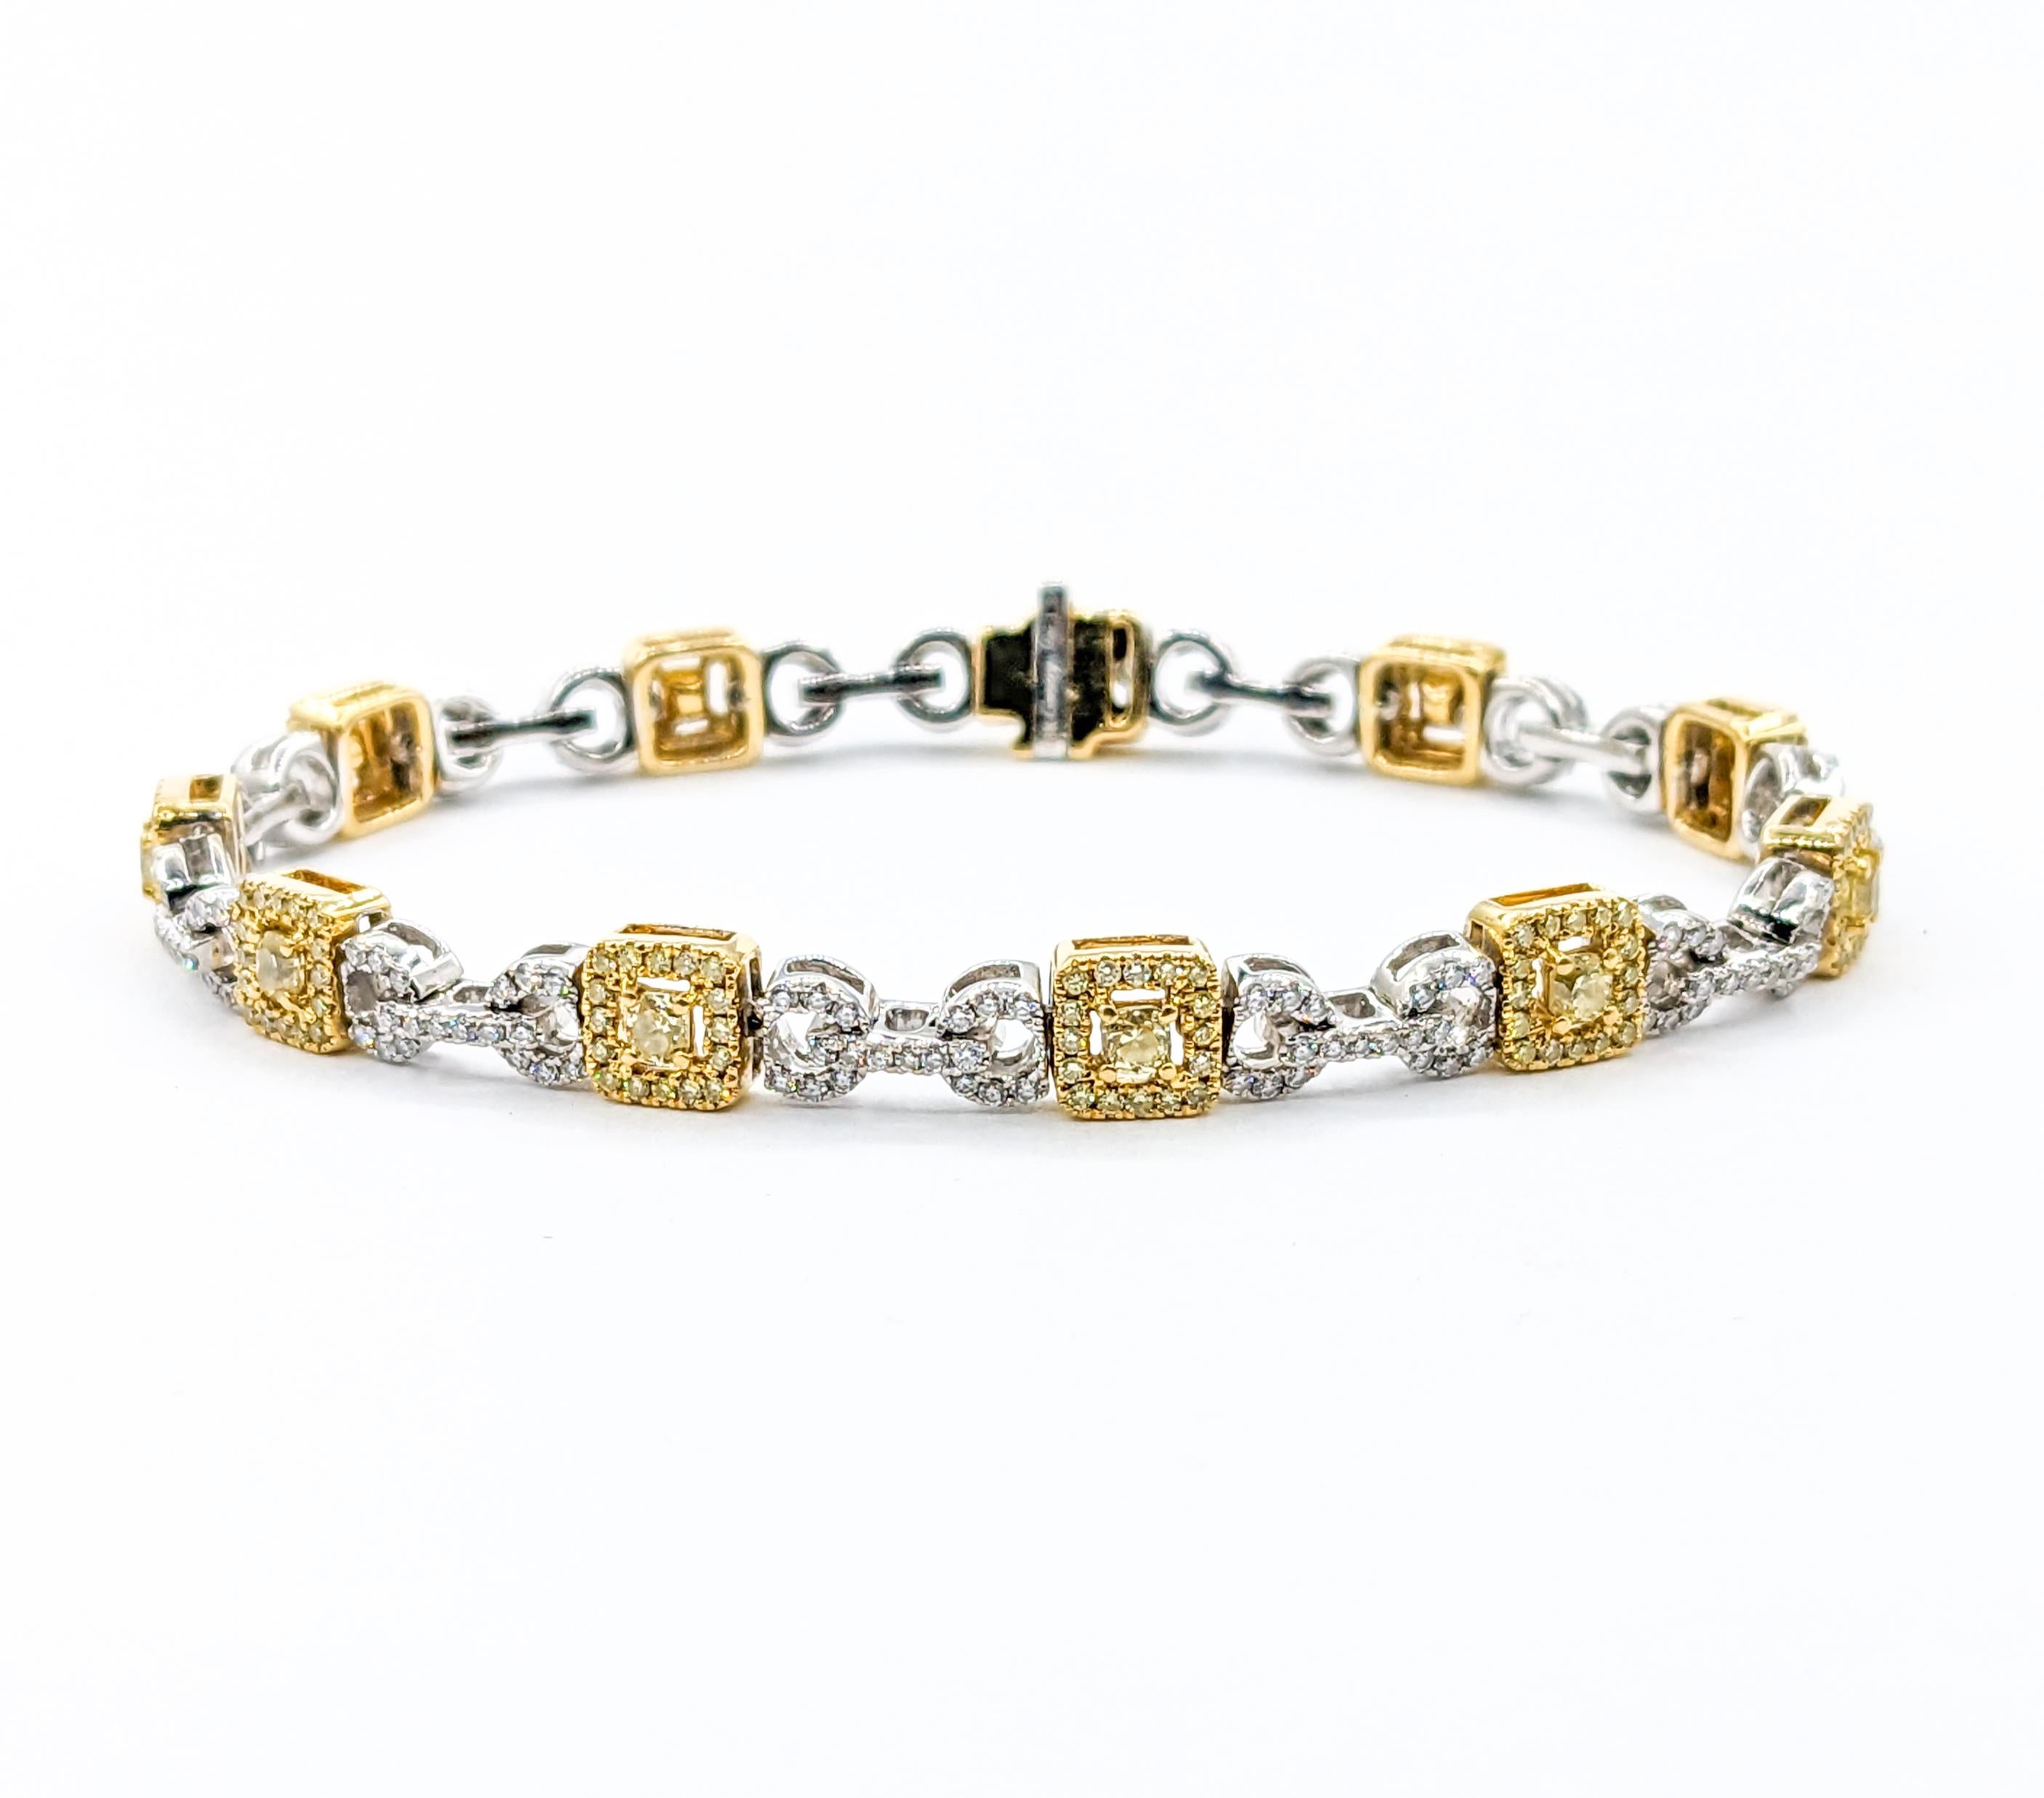 3.00ctw Diamond Bracelet in 18kt Two-Tone Gold

Discover the elegance of this exquisite Bracelet crafted in 18k Two Tone, adorned with a dazzling 3.00ctw of Cushion Cut Yellow Diamonds and White Round Diamonds. The Sparkly Diamonds showcase SI